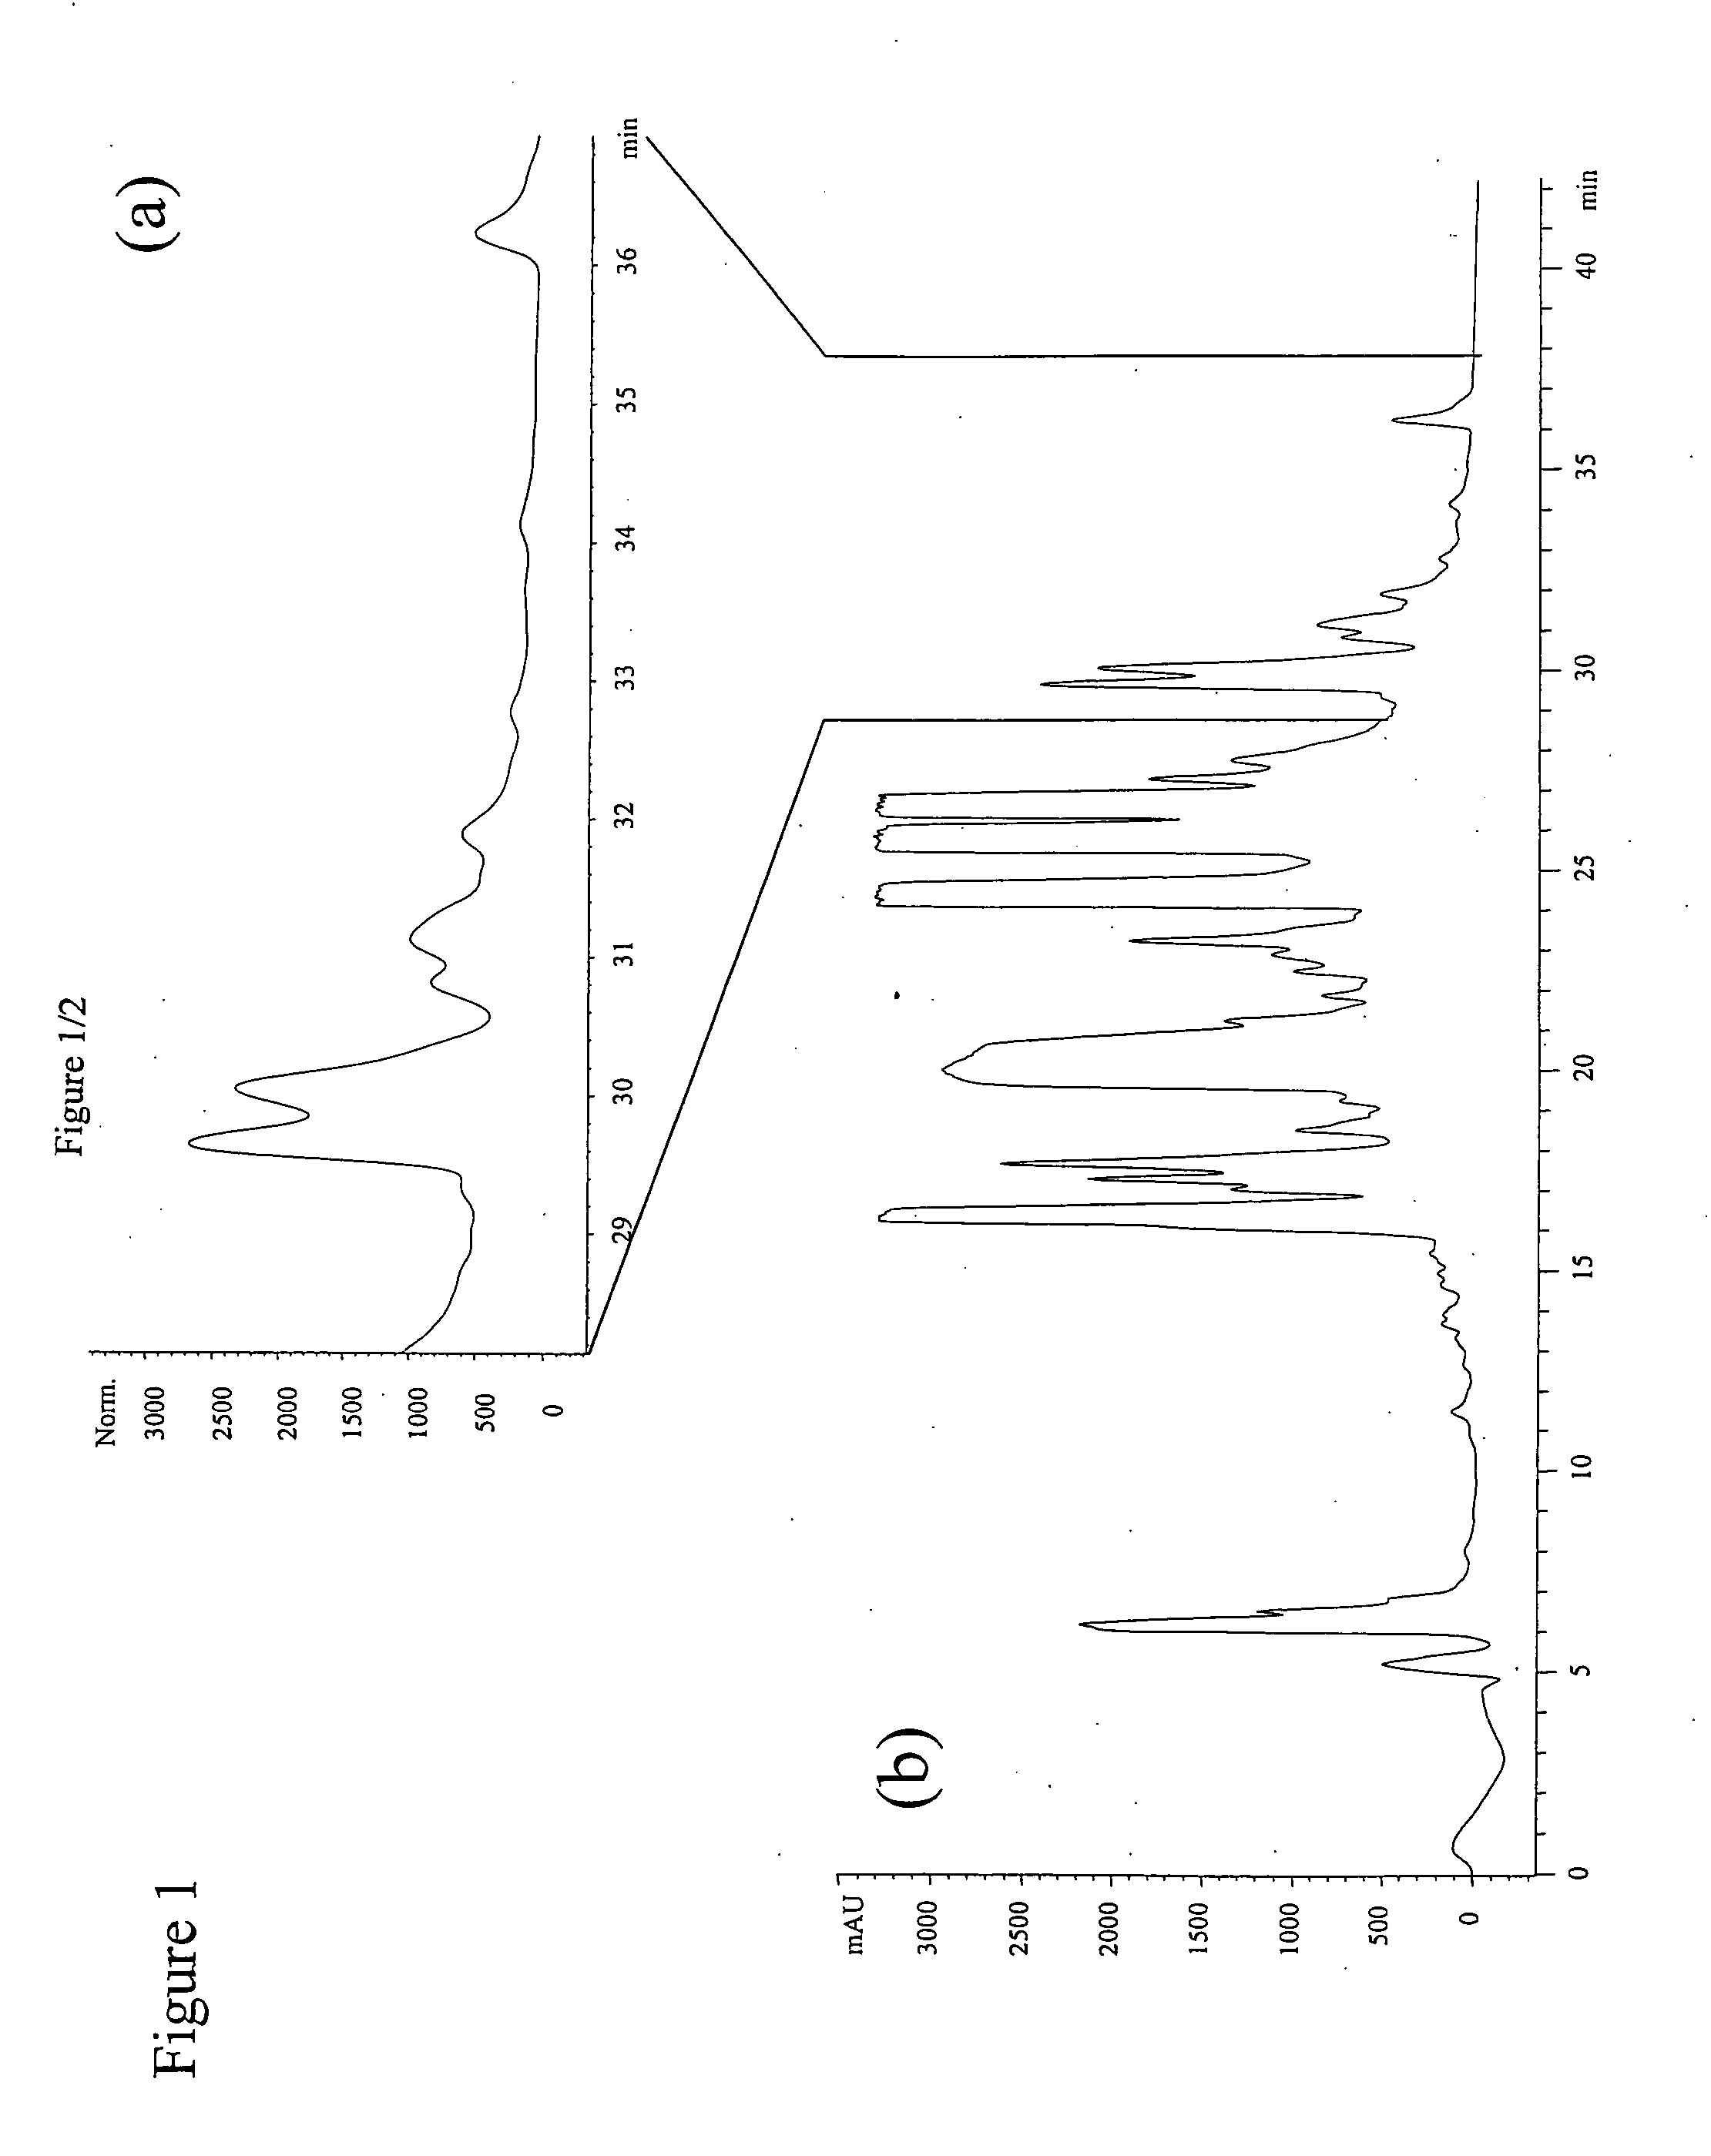 Nucleic acid molecules encoding cyclotide polypeptides and methods of use